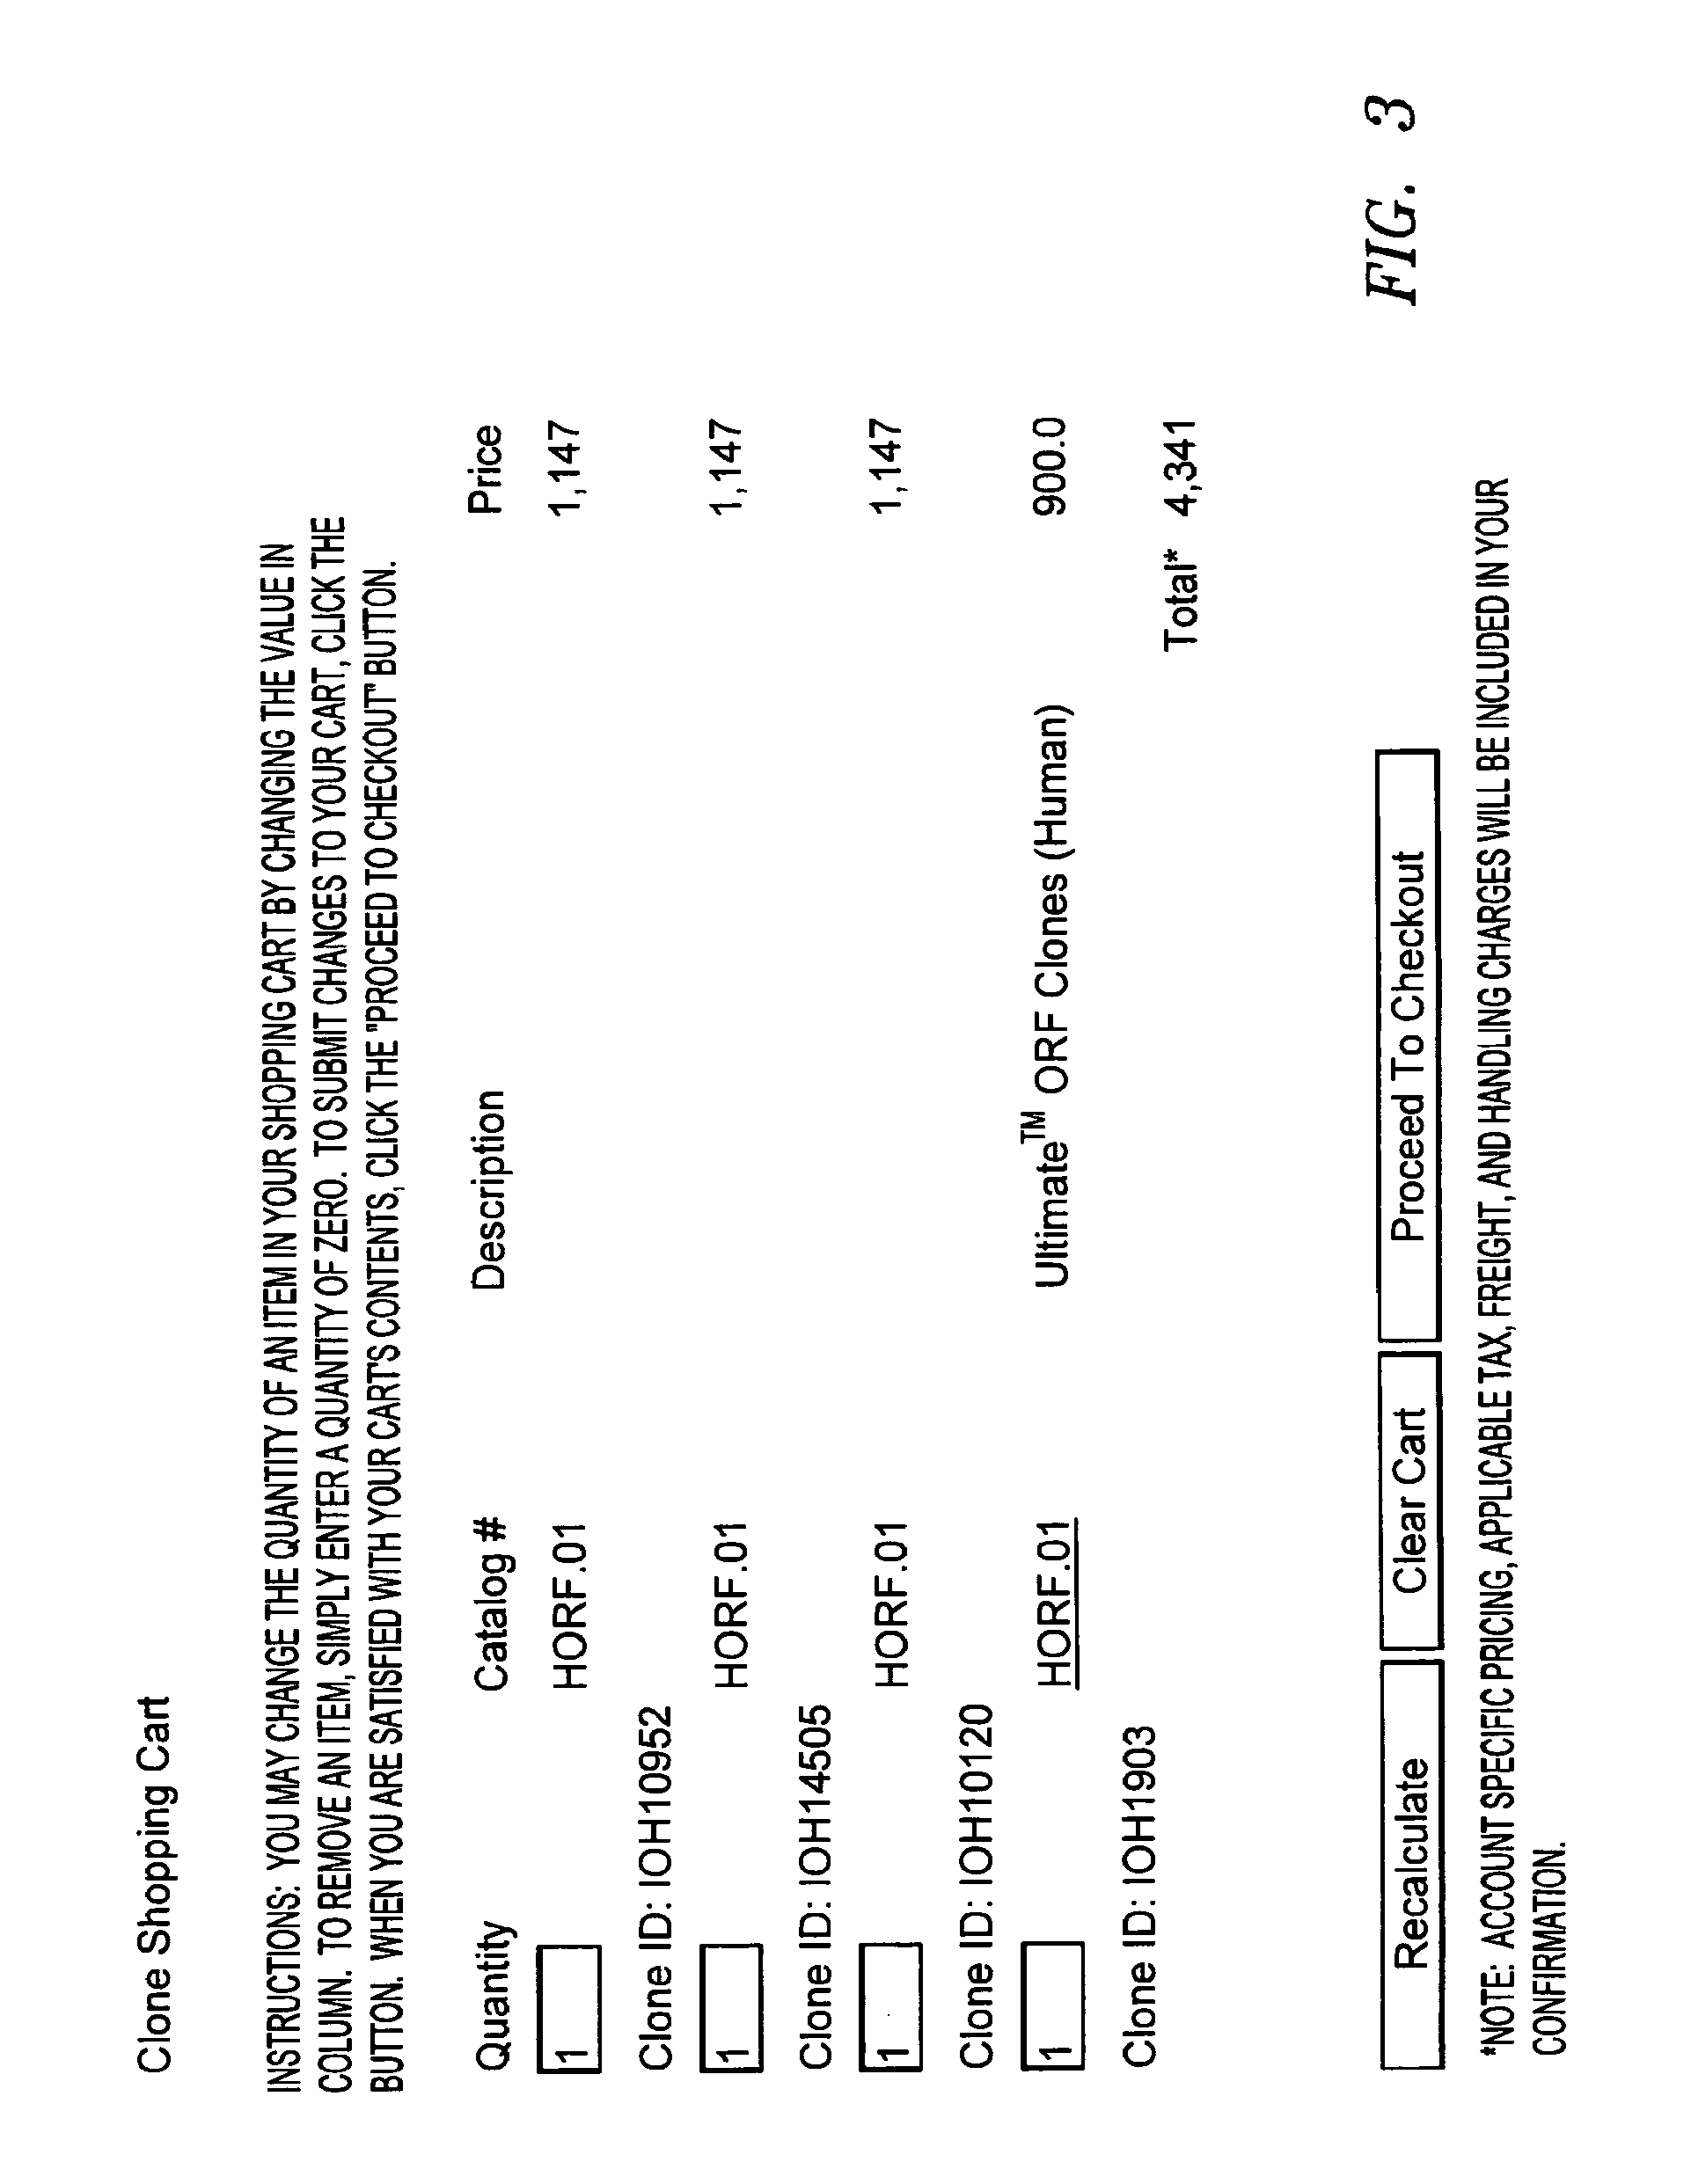 Collections of Matched Biological Reagents and Methods for Identifying Matched Reagents